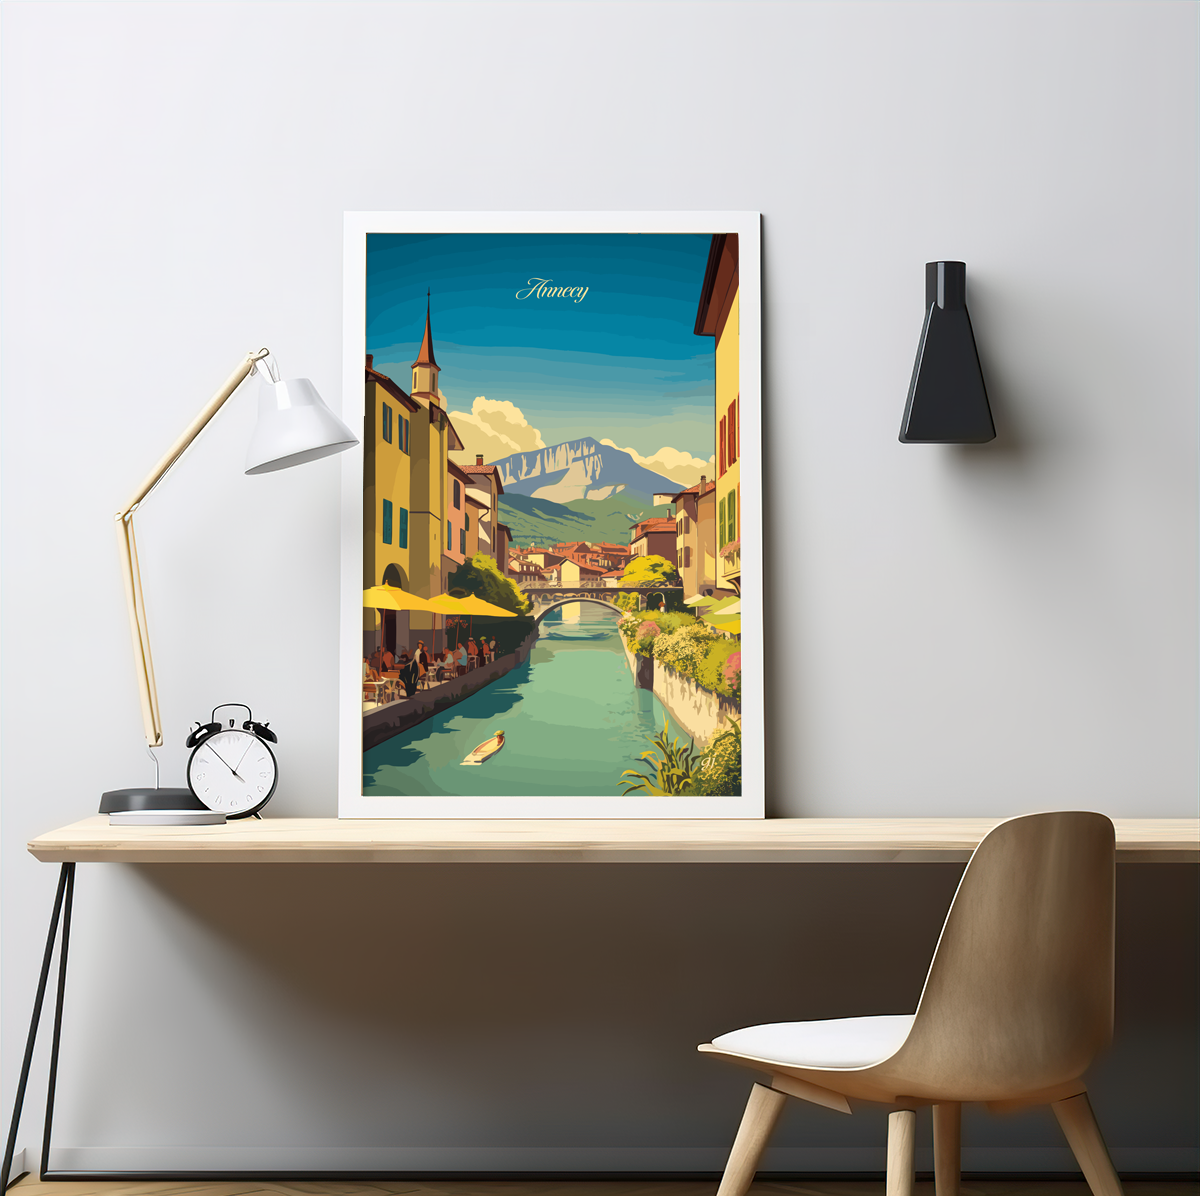 Annecy | Travel Poster